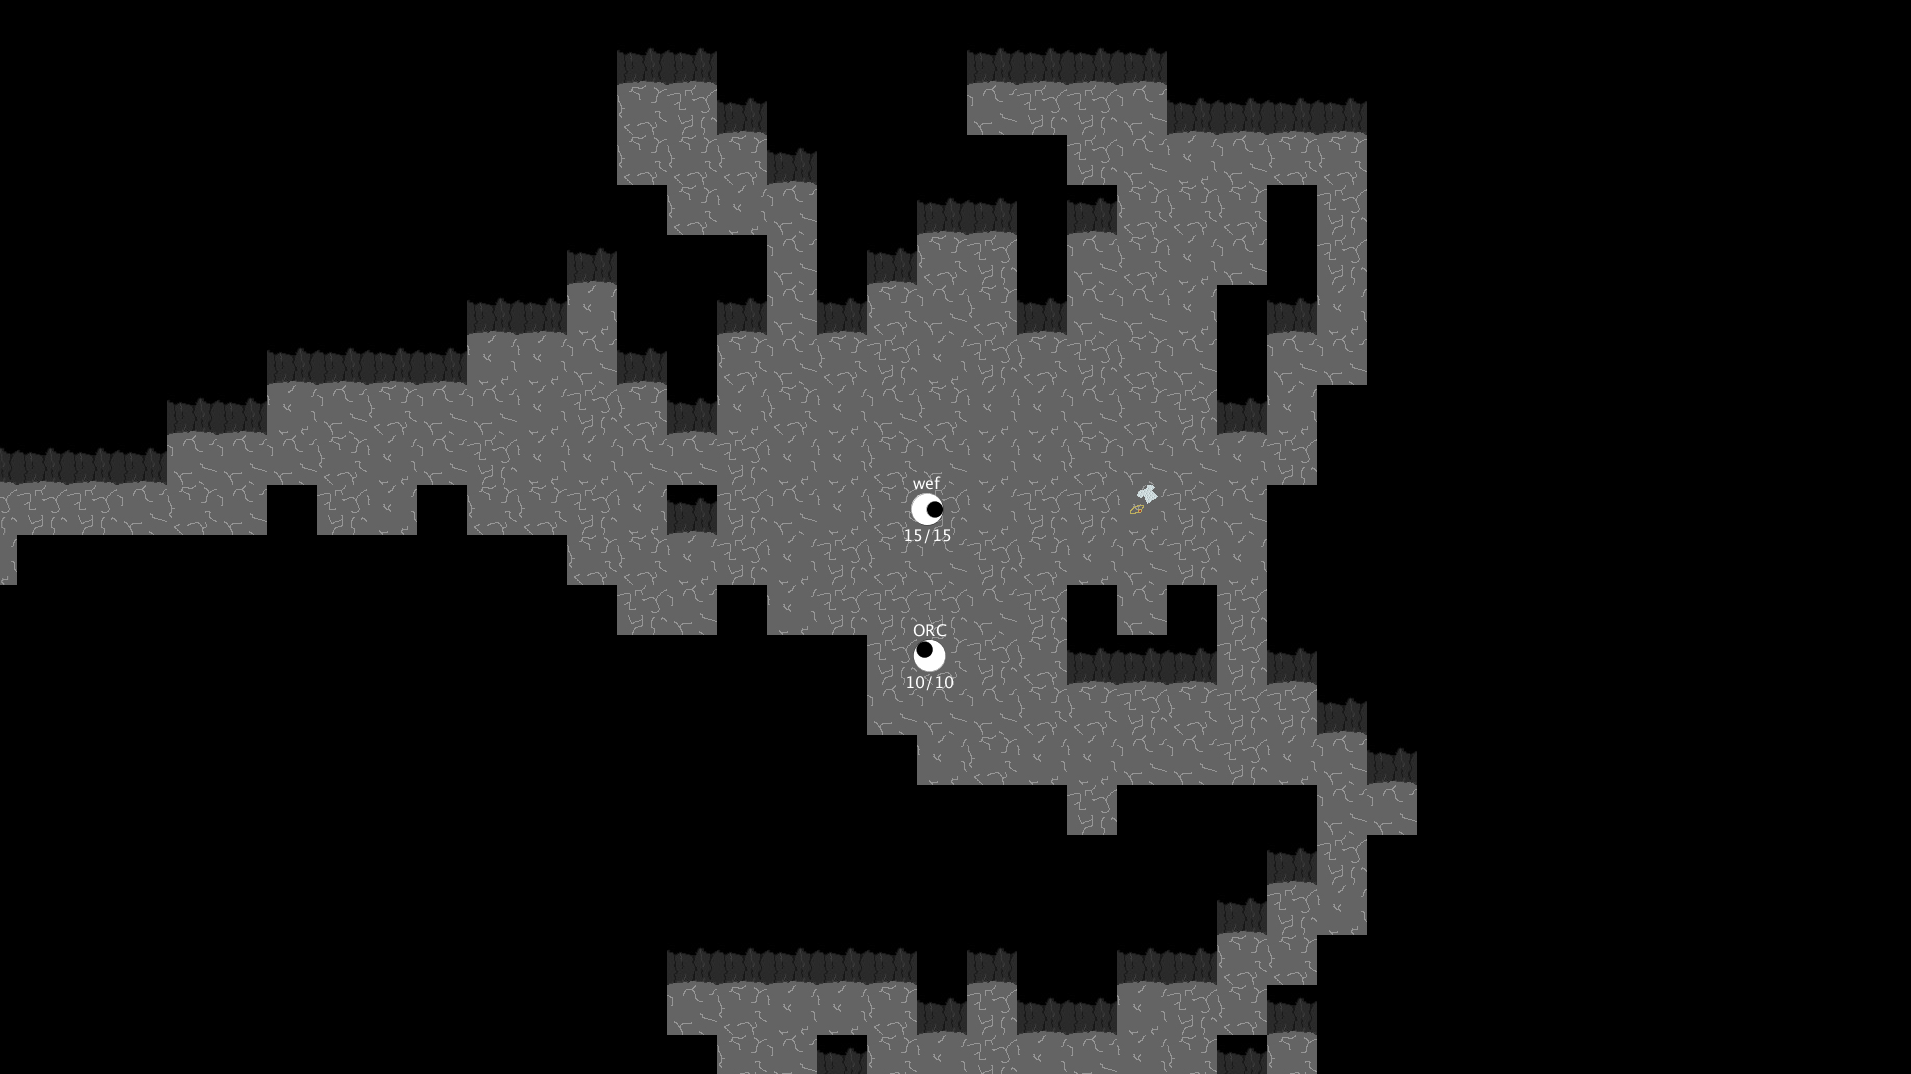 A screenshot of Gundabad, where the player 'wef' is surrounded by enemies, but some treasure lies on the floor nearby.